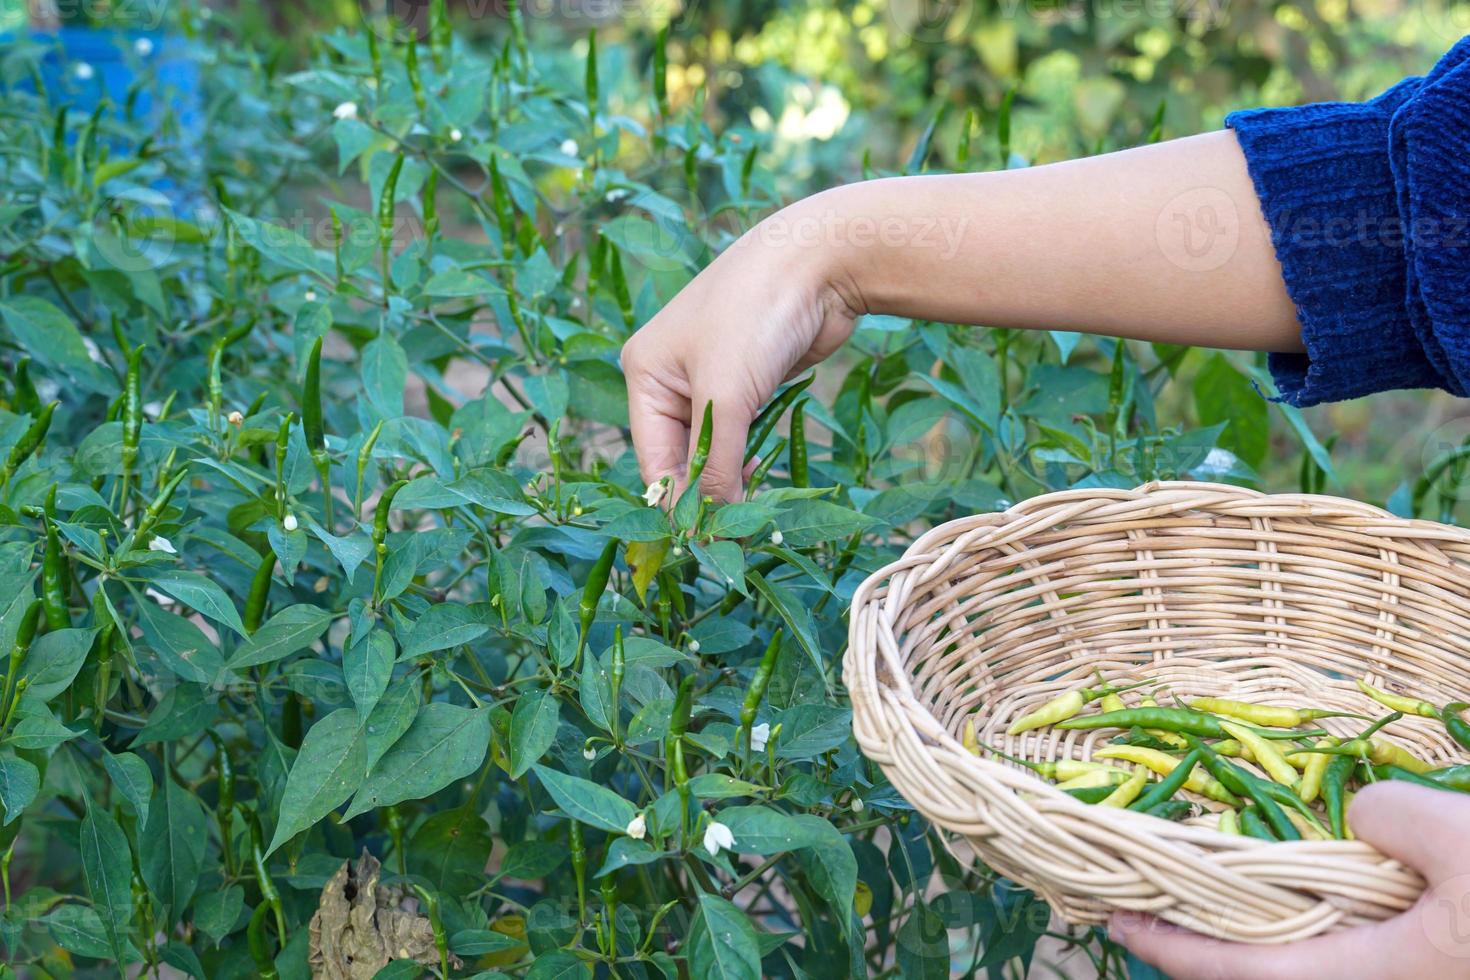 Thai people pick chili peppers that are planted in the garden behind the house to cook. in the concept of kitchen garden vegetables, sufficiency economy, seasonings, herbs. photo